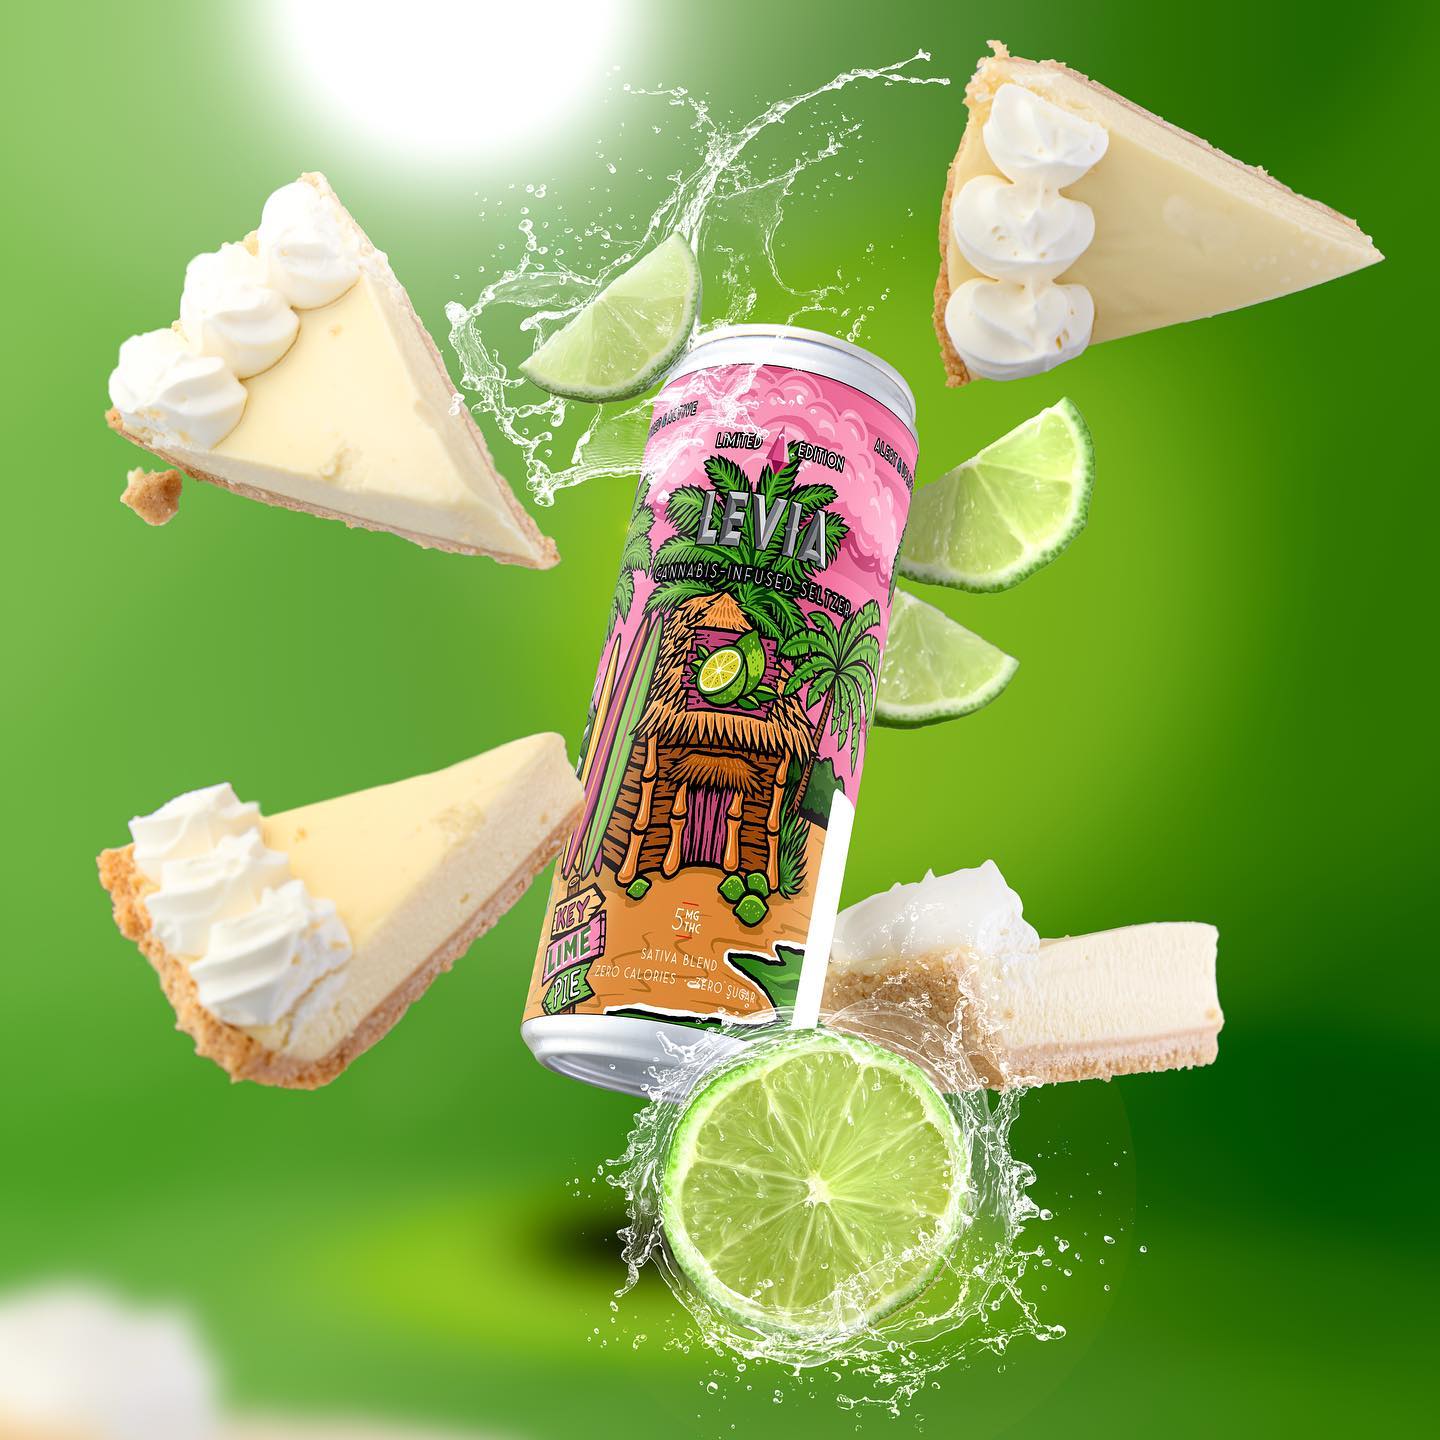 SIP INTO SPRING WITH OUR NEW LIMITED-EDITION FLAVOR, KEY LIME PIE!
Key Lime Pie will exclusively hit the shelves of @ayr_mass Back Bay on March 10, just in time for @necannacon, taking place across the street at the Hynes Convention Center March 10-12. Key Lime Pie will arrive on more shelves across 150+ Massachusetts retailers starting on March 13th.
Our newest flavor consists of an energizing cannabis blend with tart, citrusy, and vanilla flavors, with the intended effect of feeling inspired and alert.
This limited-run offering features original artwork from @patrickpollardartworks. Thank you @craigcapellophotography for capturing our latest flavor!